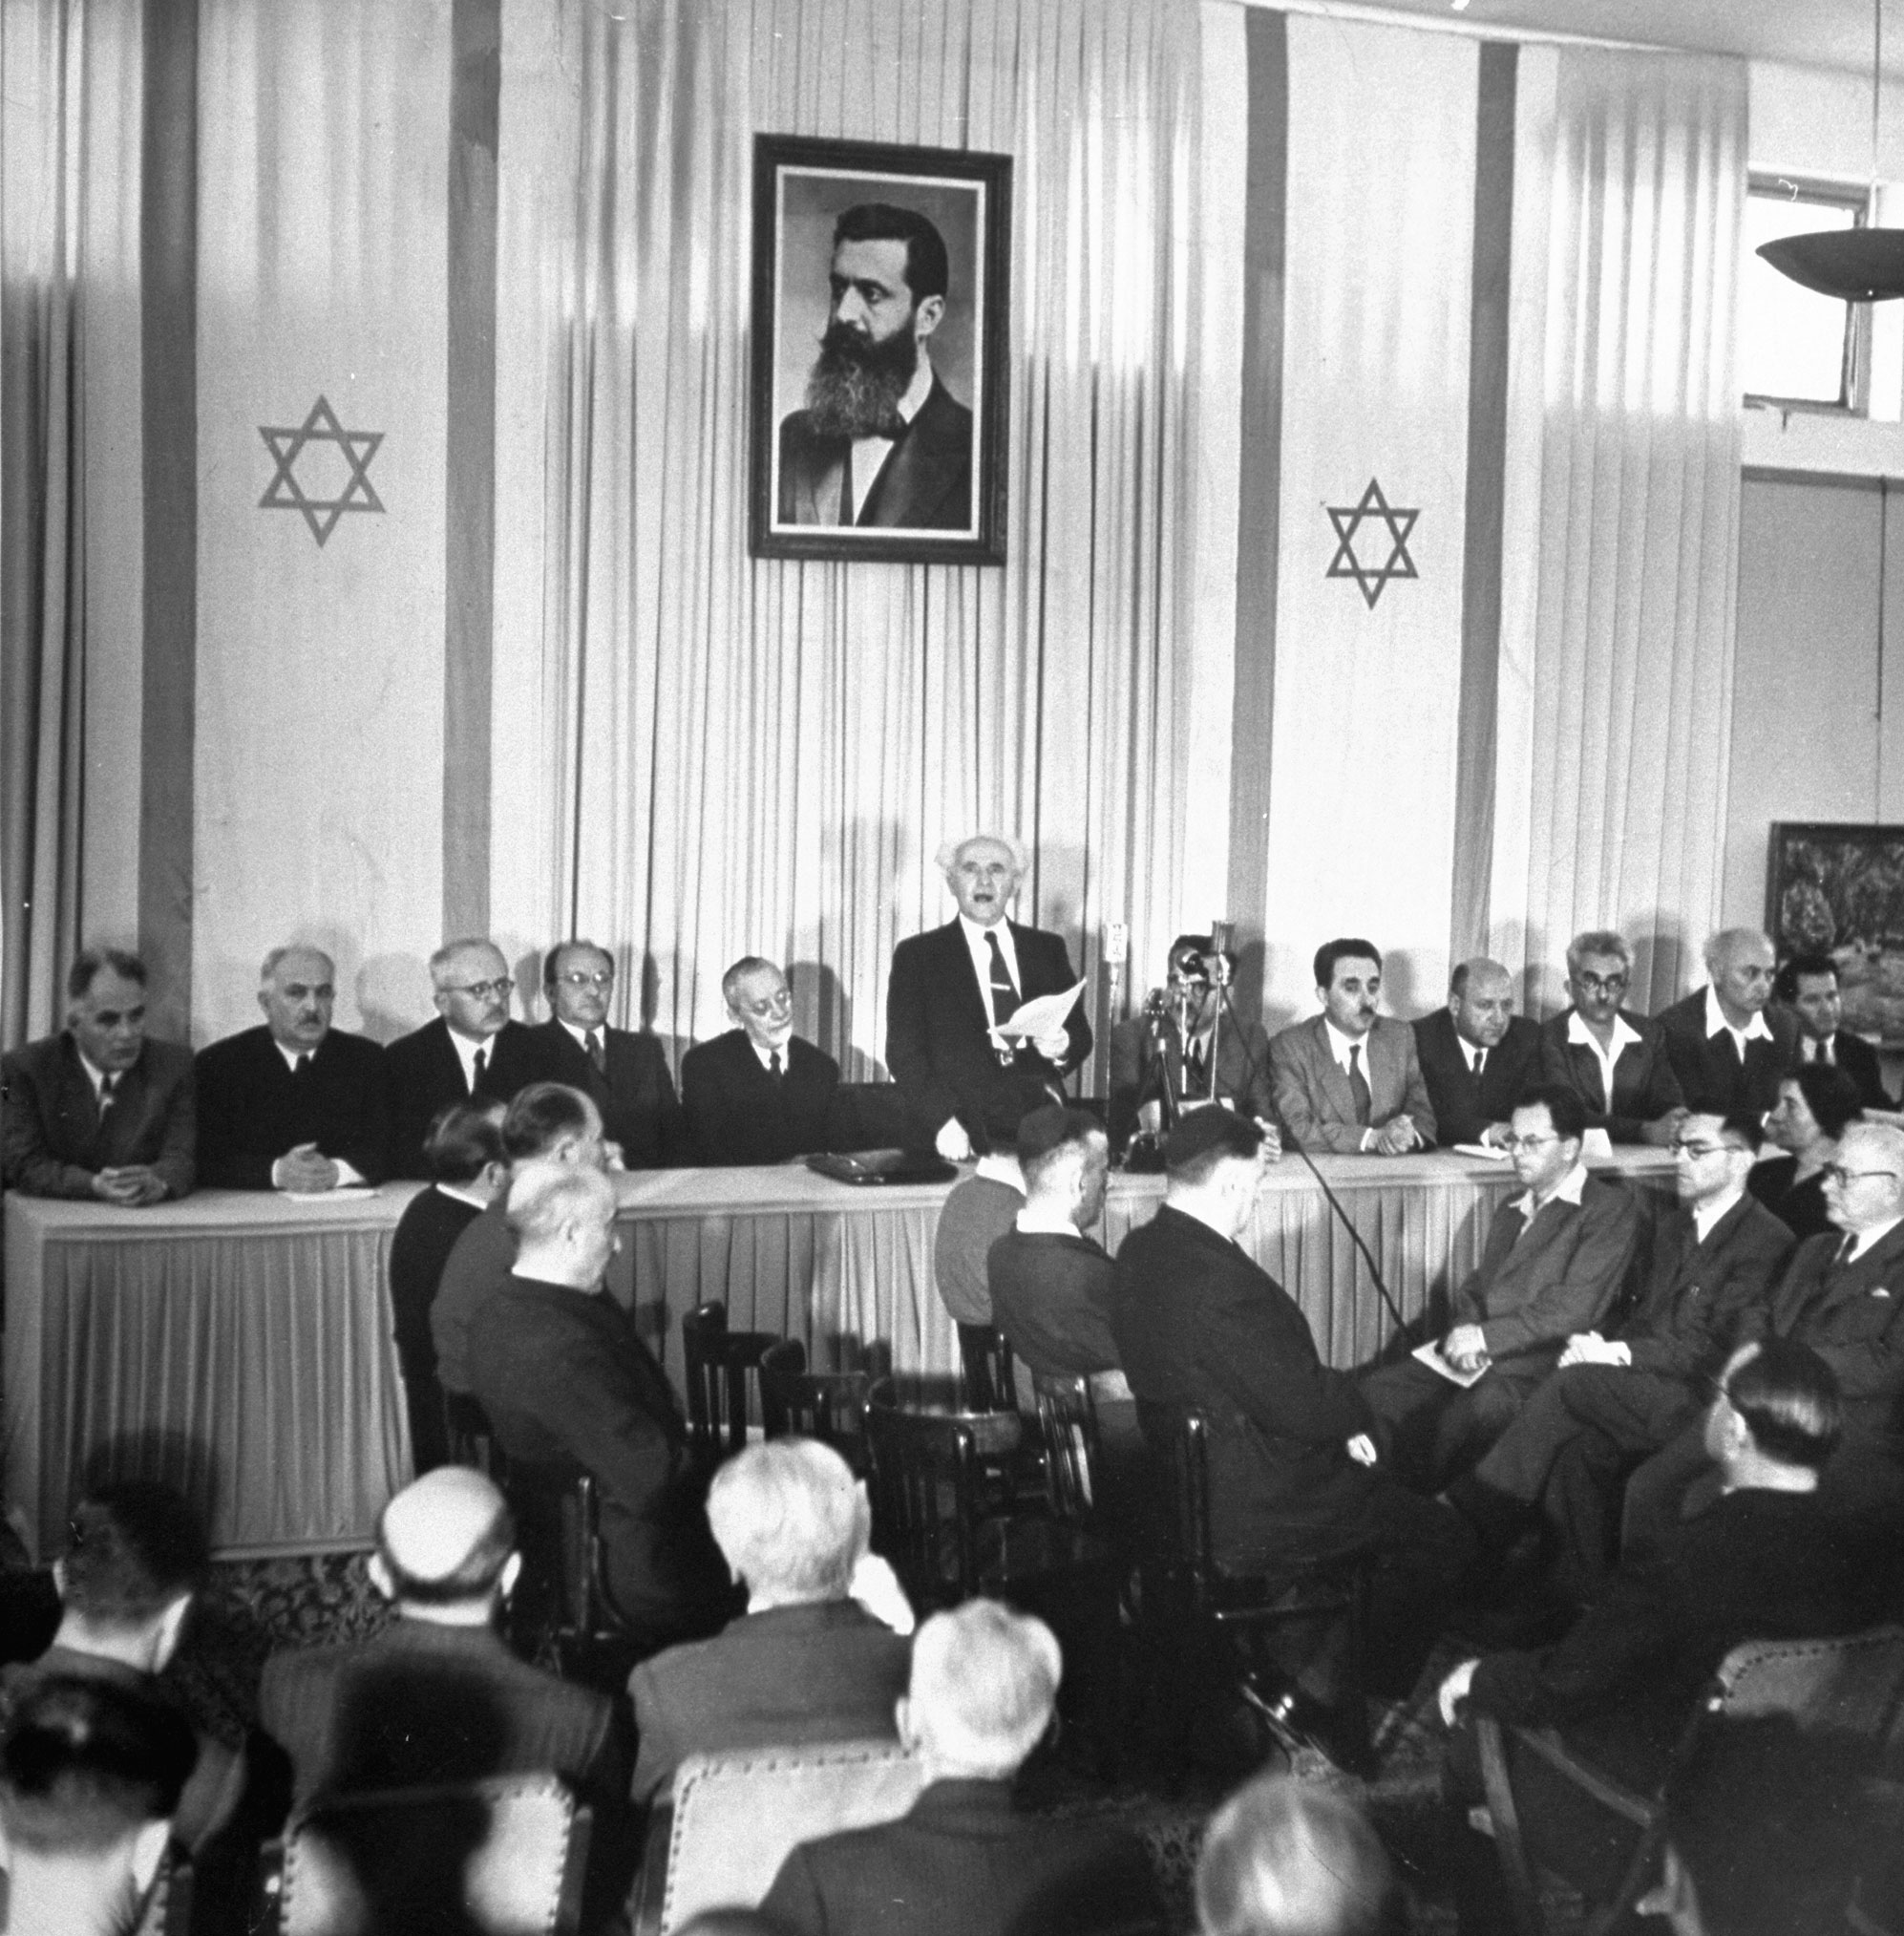 Proclamation of Nationhood is read by Israel's Prime Minister David Ben-Gurion. Around him are members of the provisional government, including Foreign Minister Moshe Shertok (third from right). Labor Minister Moshe Ben Tov (extreme right) wears sport shirt. Portrait above is of Theodor Herzl, Zionism's founder